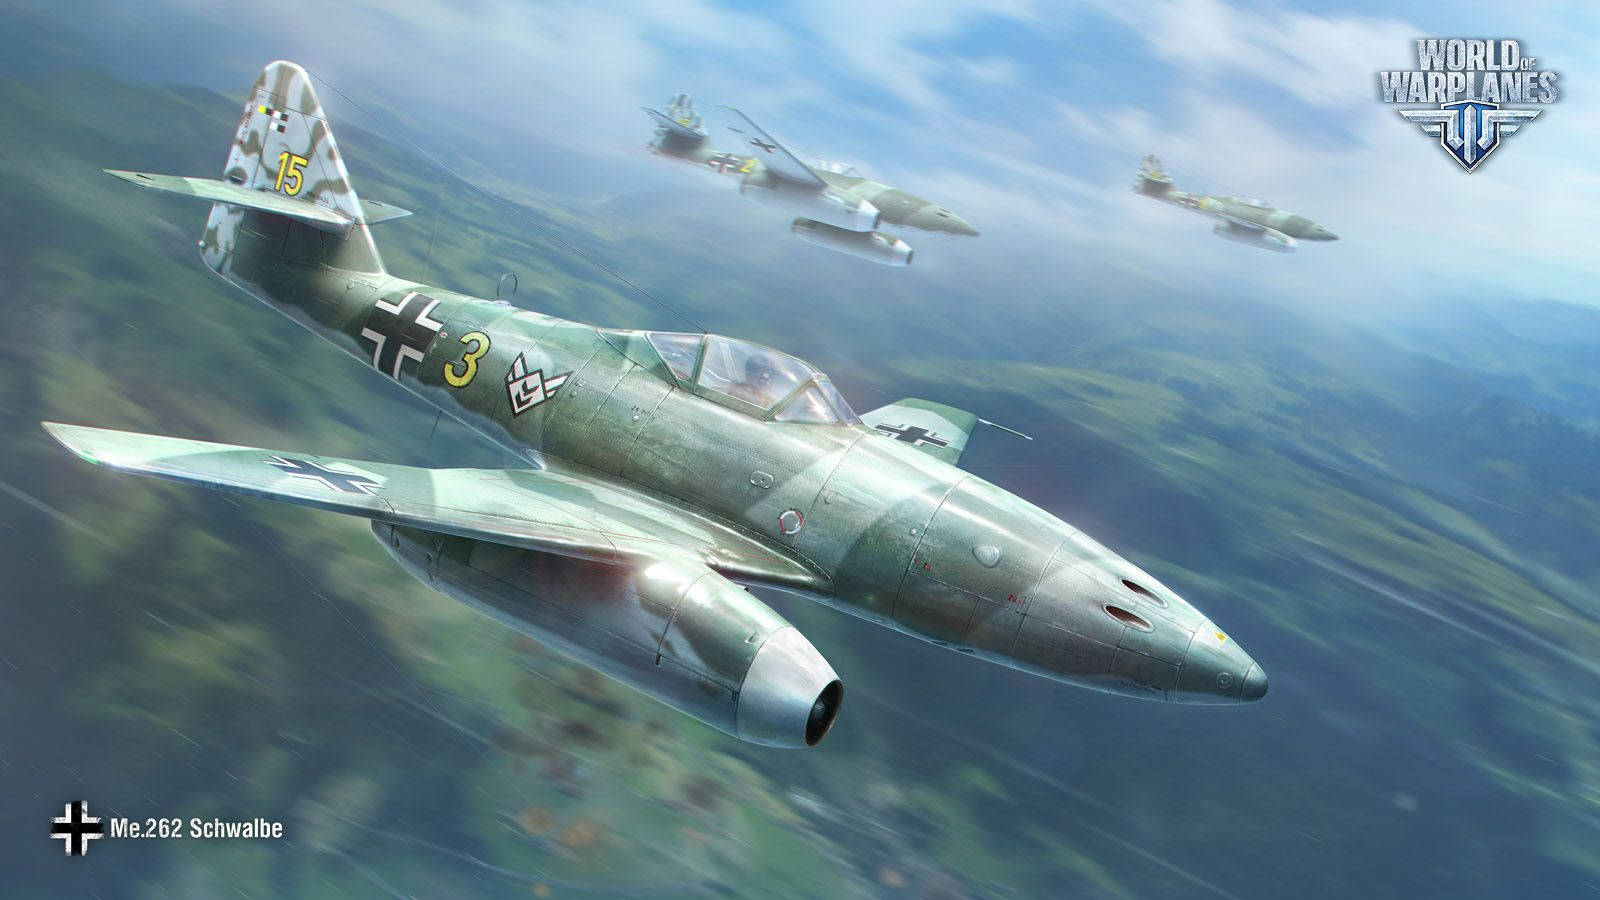 German Ww2 Fighters Over The Mountains Wallpaper